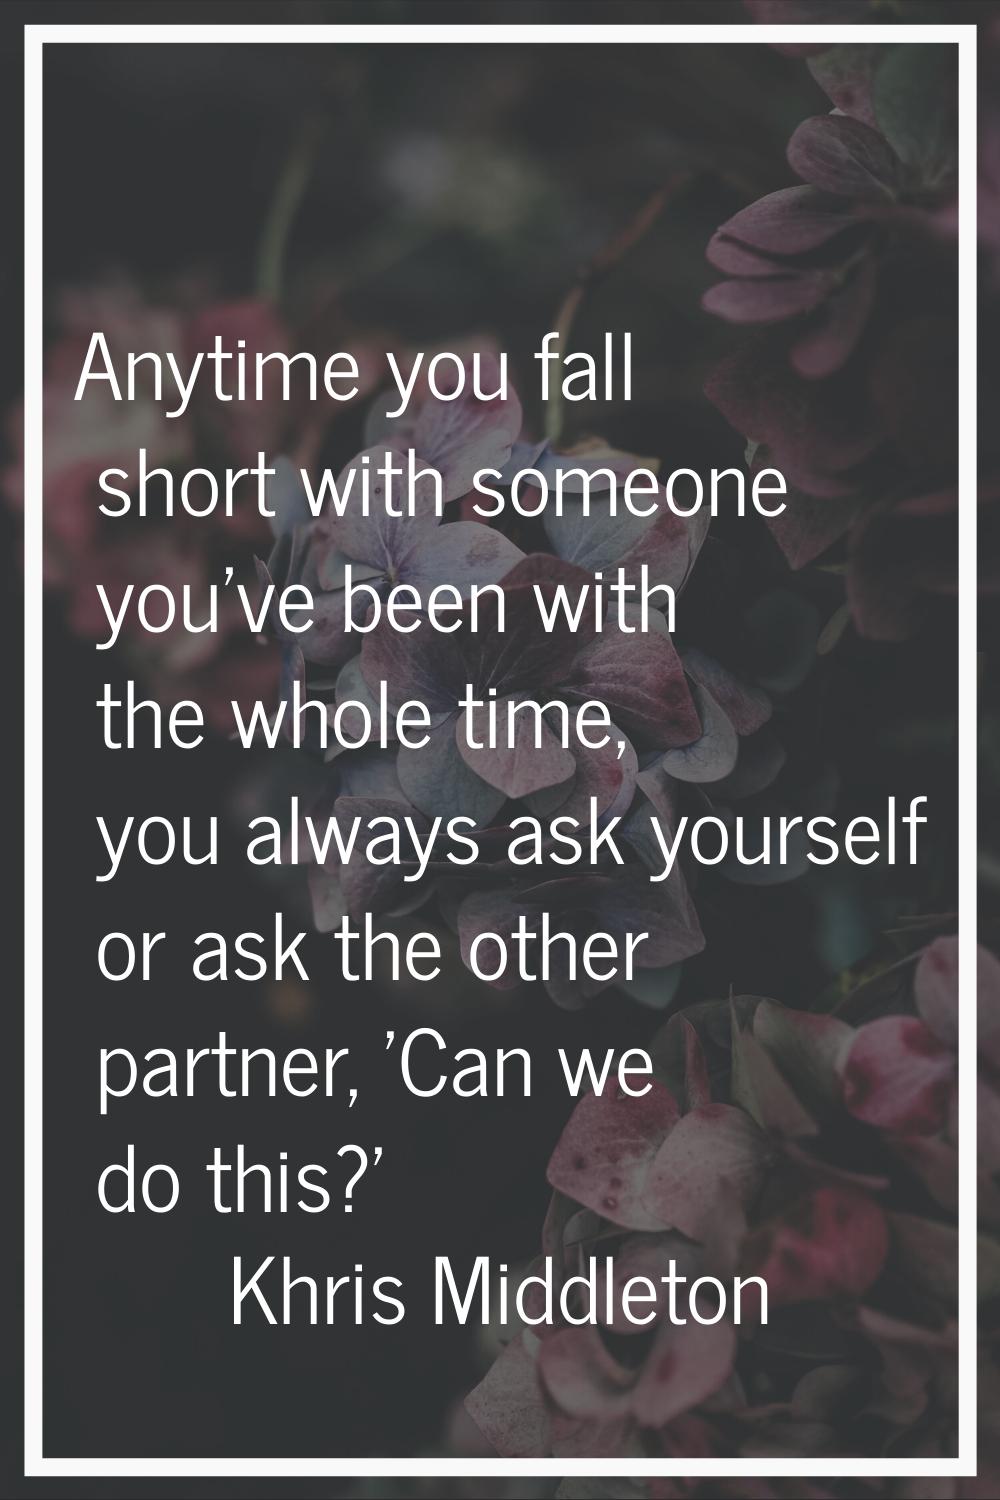 Anytime you fall short with someone you've been with the whole time, you always ask yourself or ask